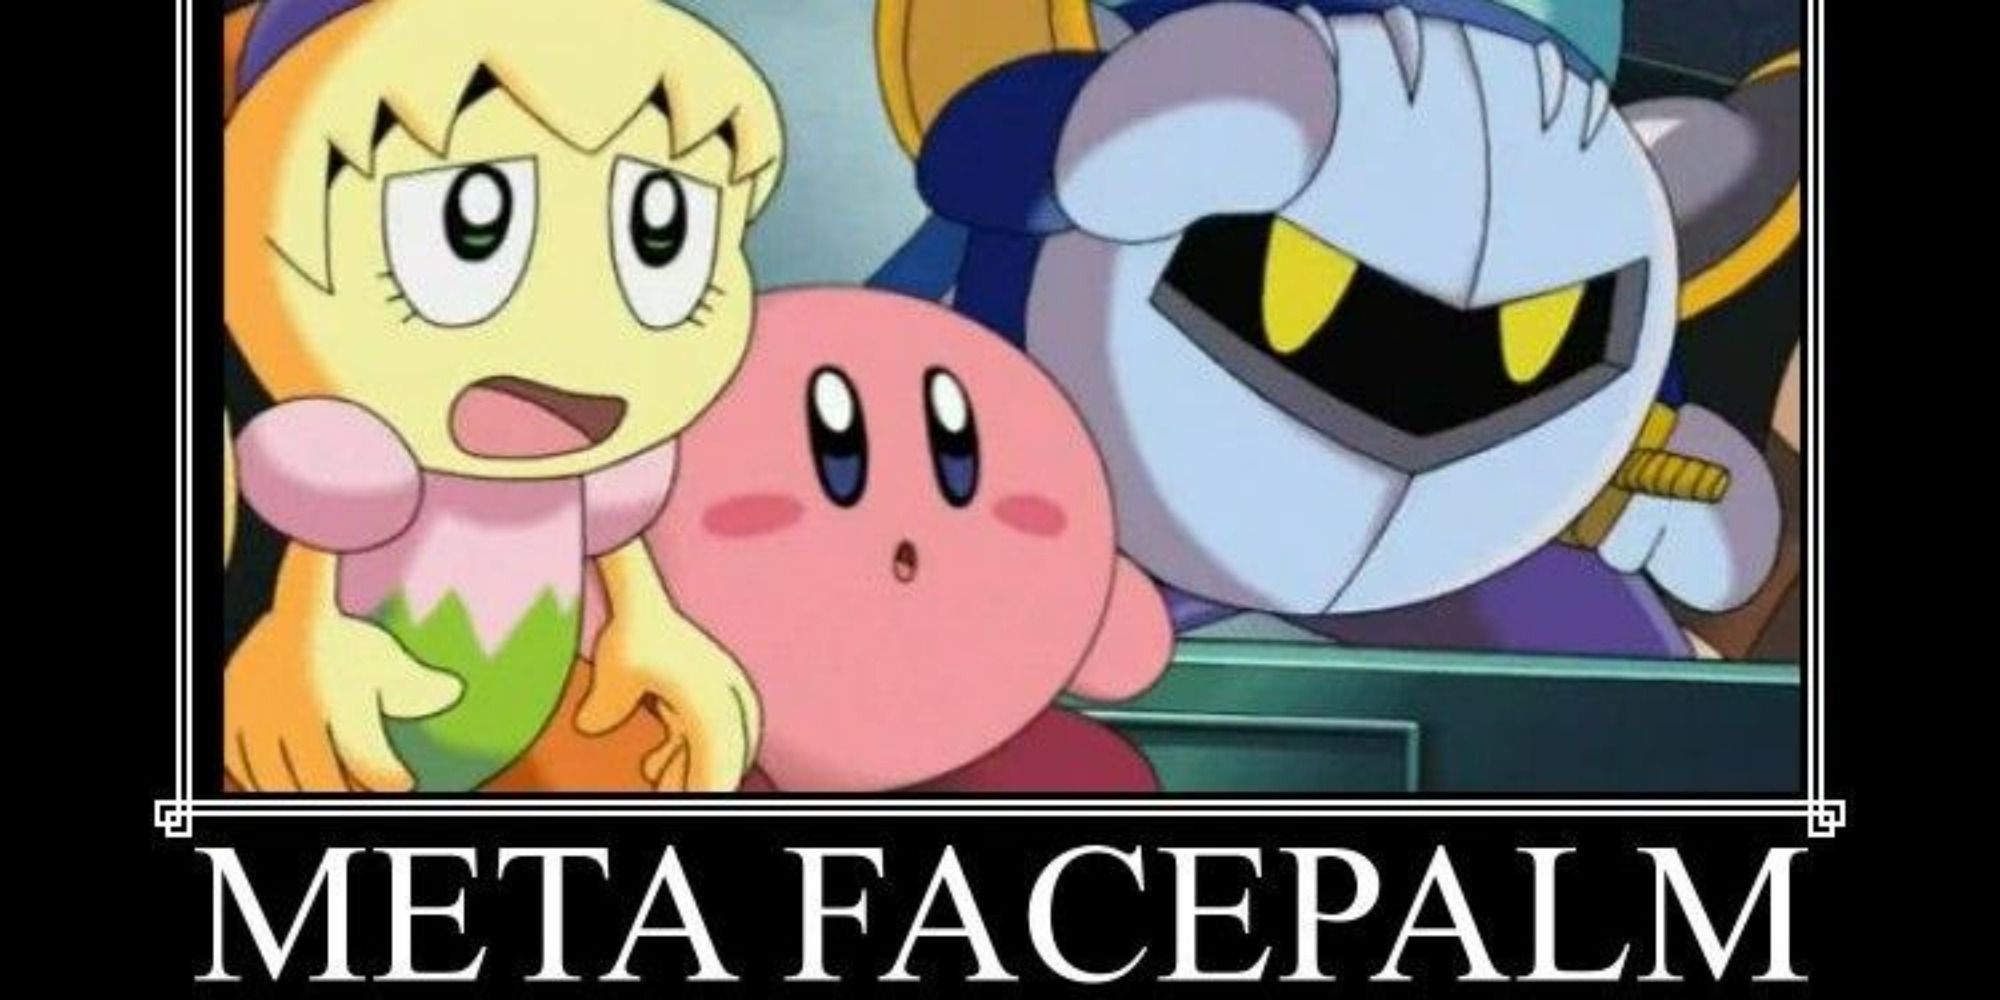 Tiff (left), Kirby (center), both with their mouths open and eyes wide, with Meta Knight (right) putting his palm on his forehead.